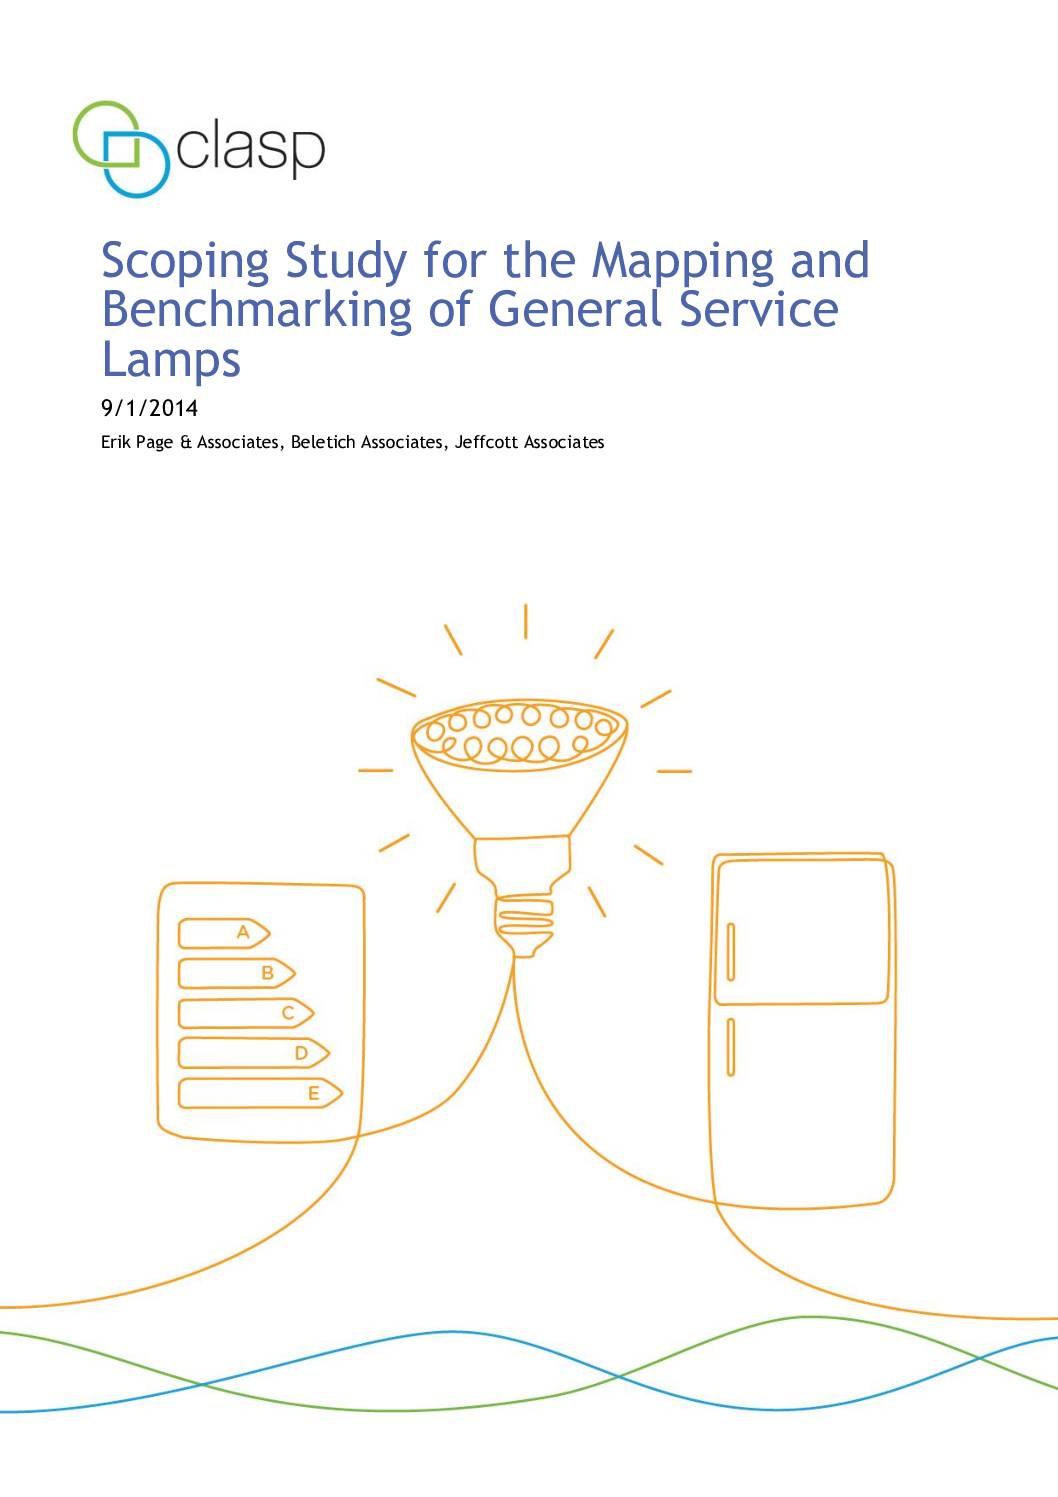 Scoping Study for the Mapping and Benchmarking of General Service Lamps